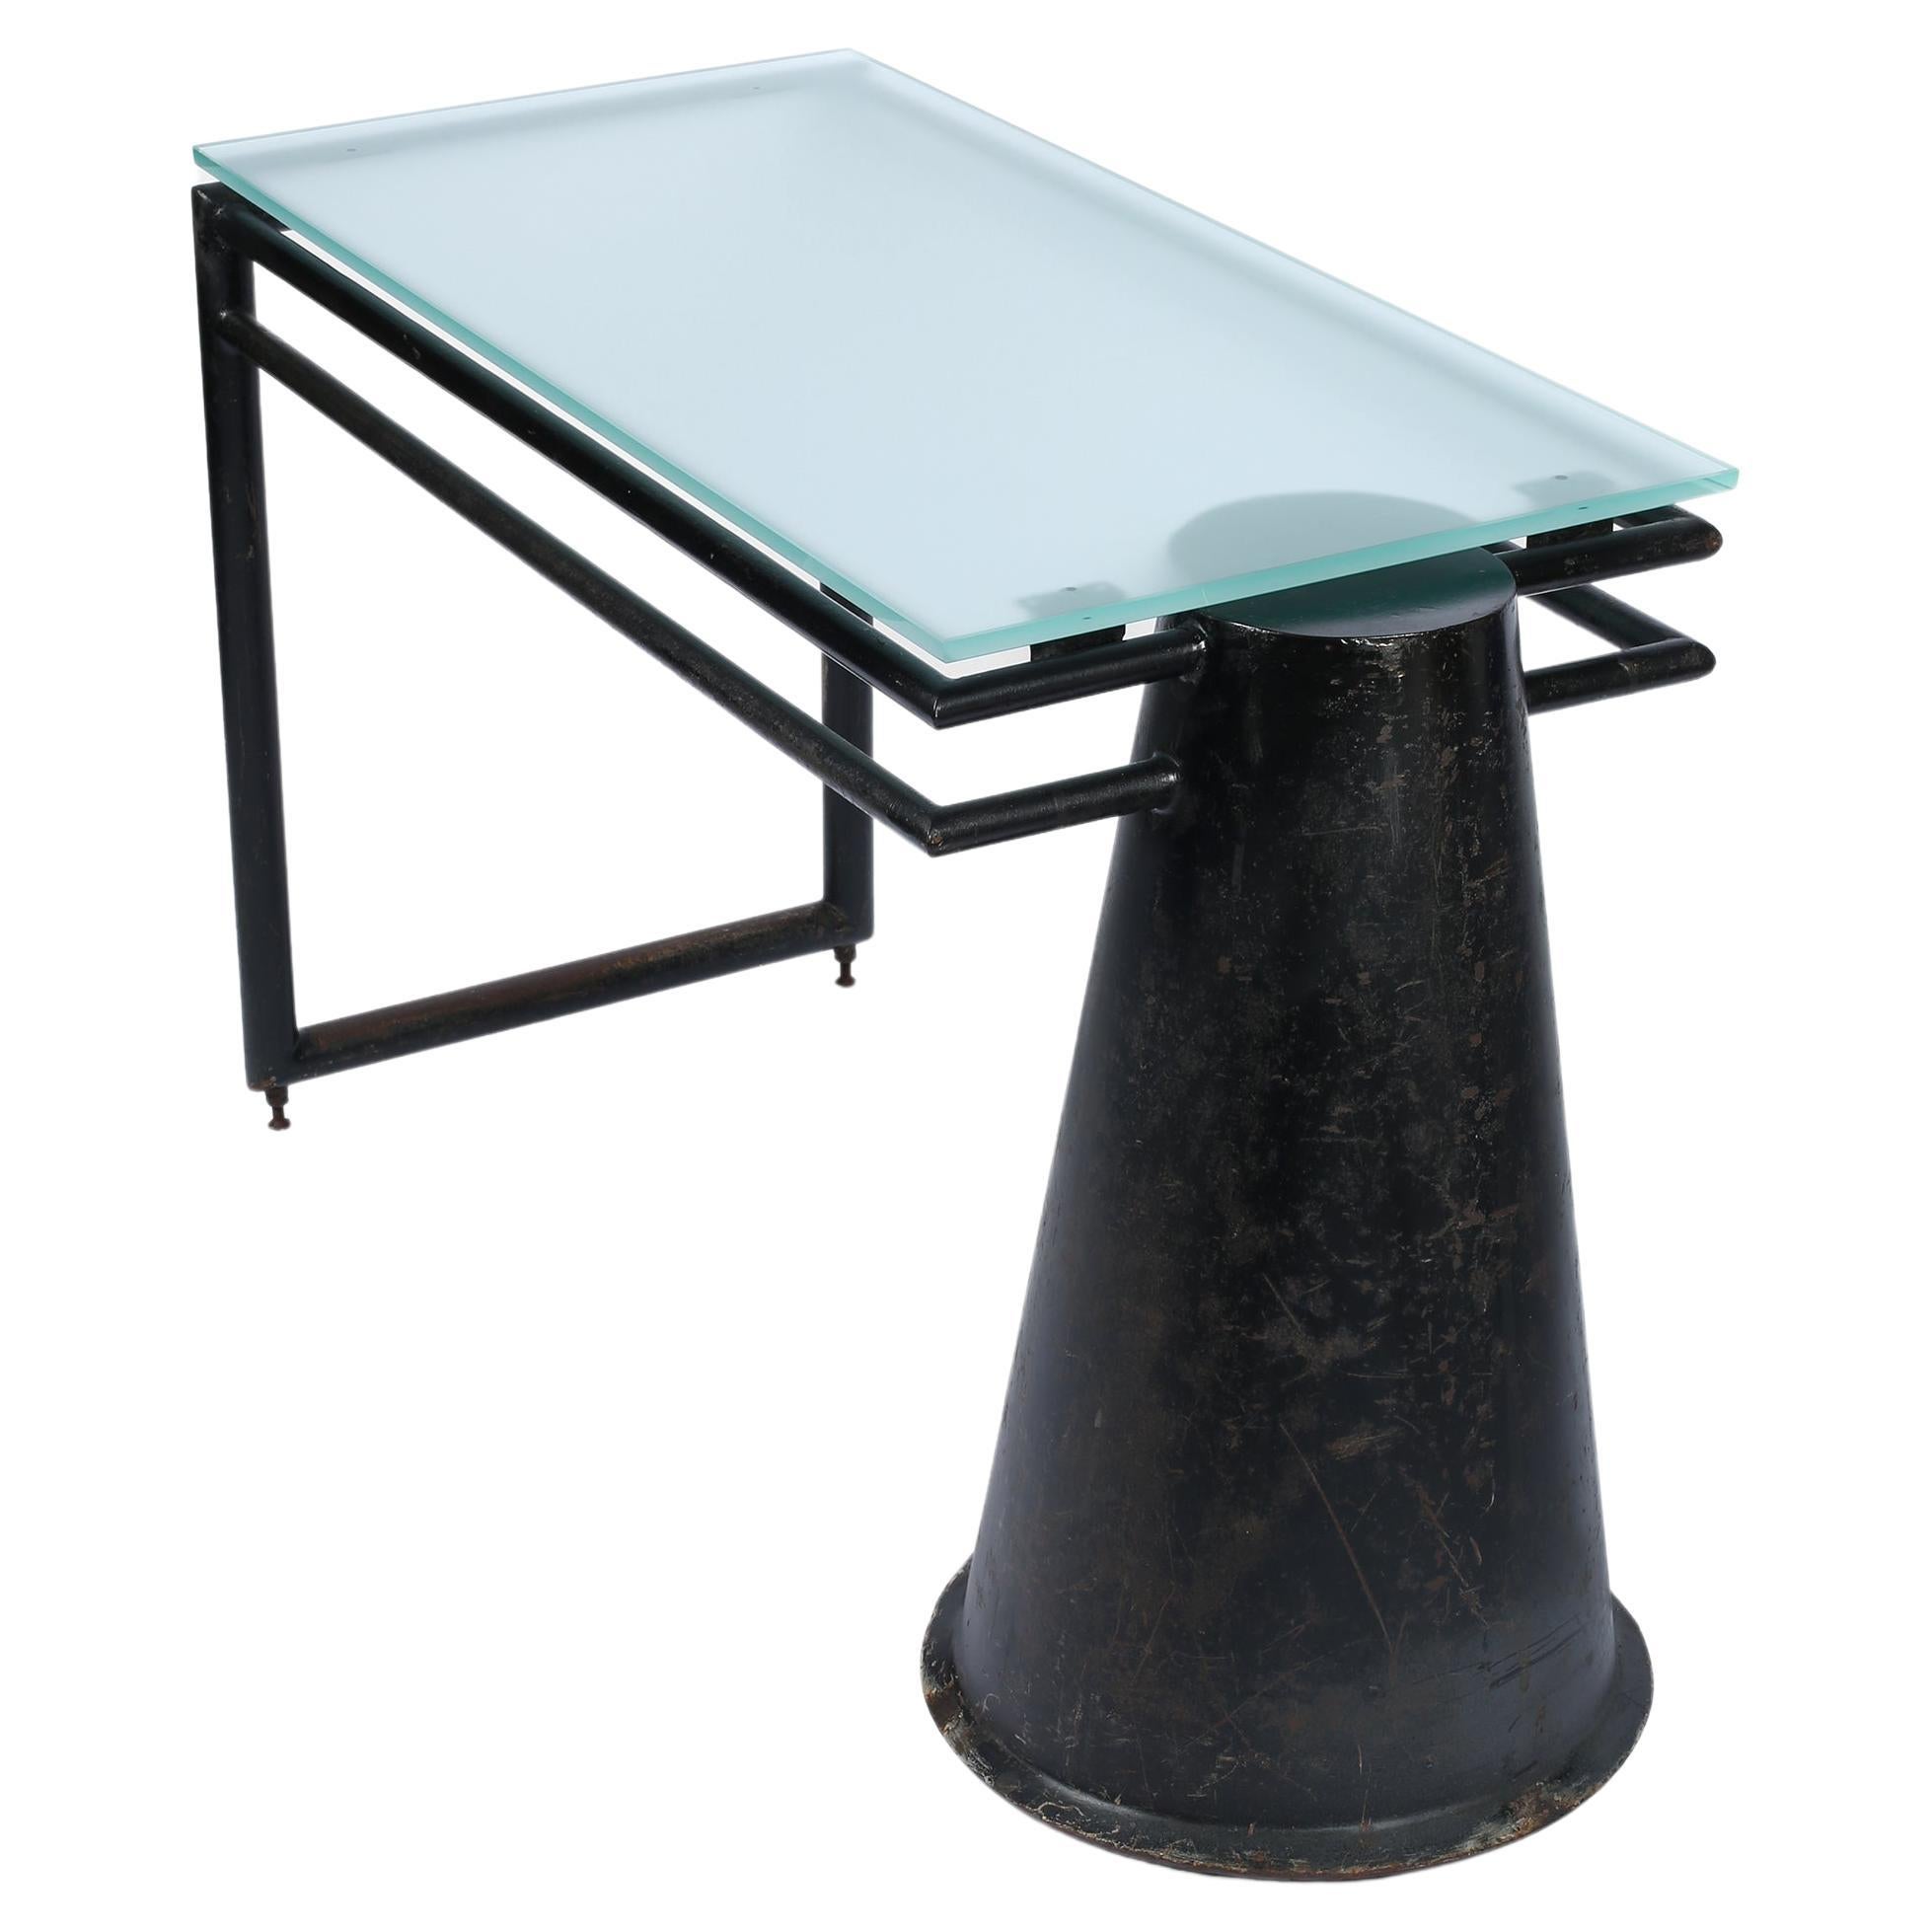 Modernist Steel and Glass Desk, French Early-Mid 20th Century